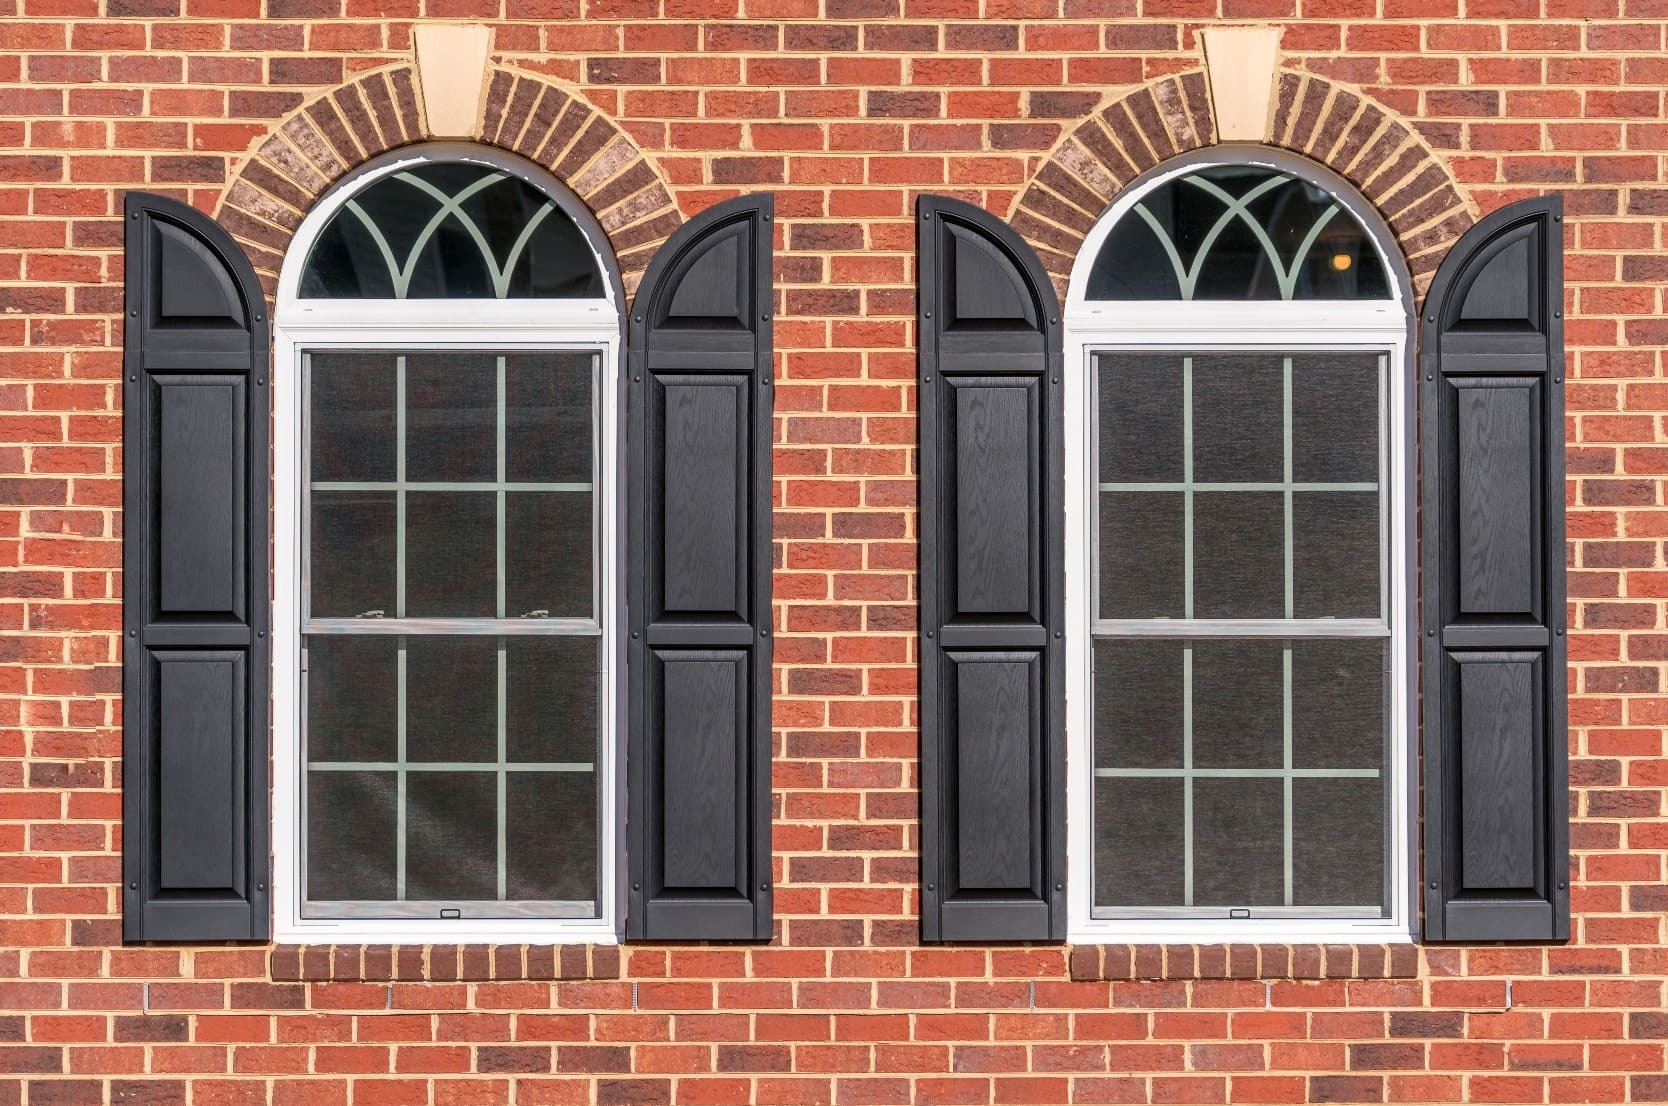 Windows with black shutters on a brick home typical of real estate in Shadeland, Lexington